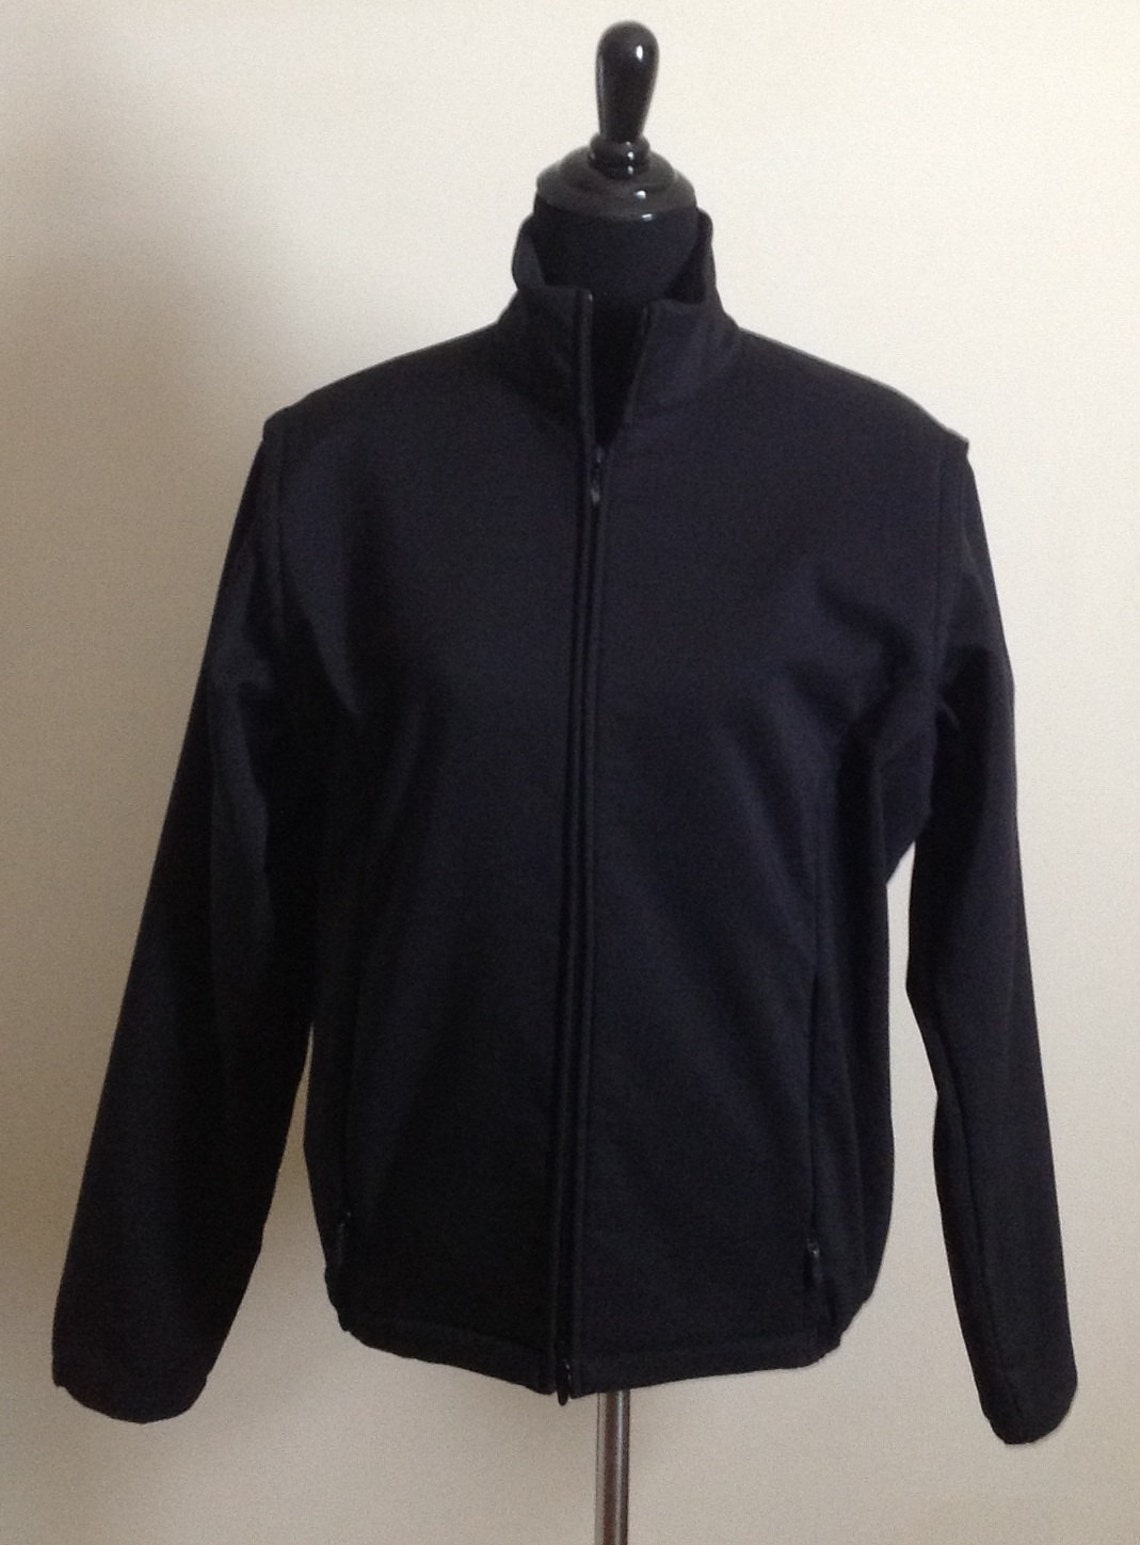 Polo Golf Jacket by Ralph Lauren - Etsy